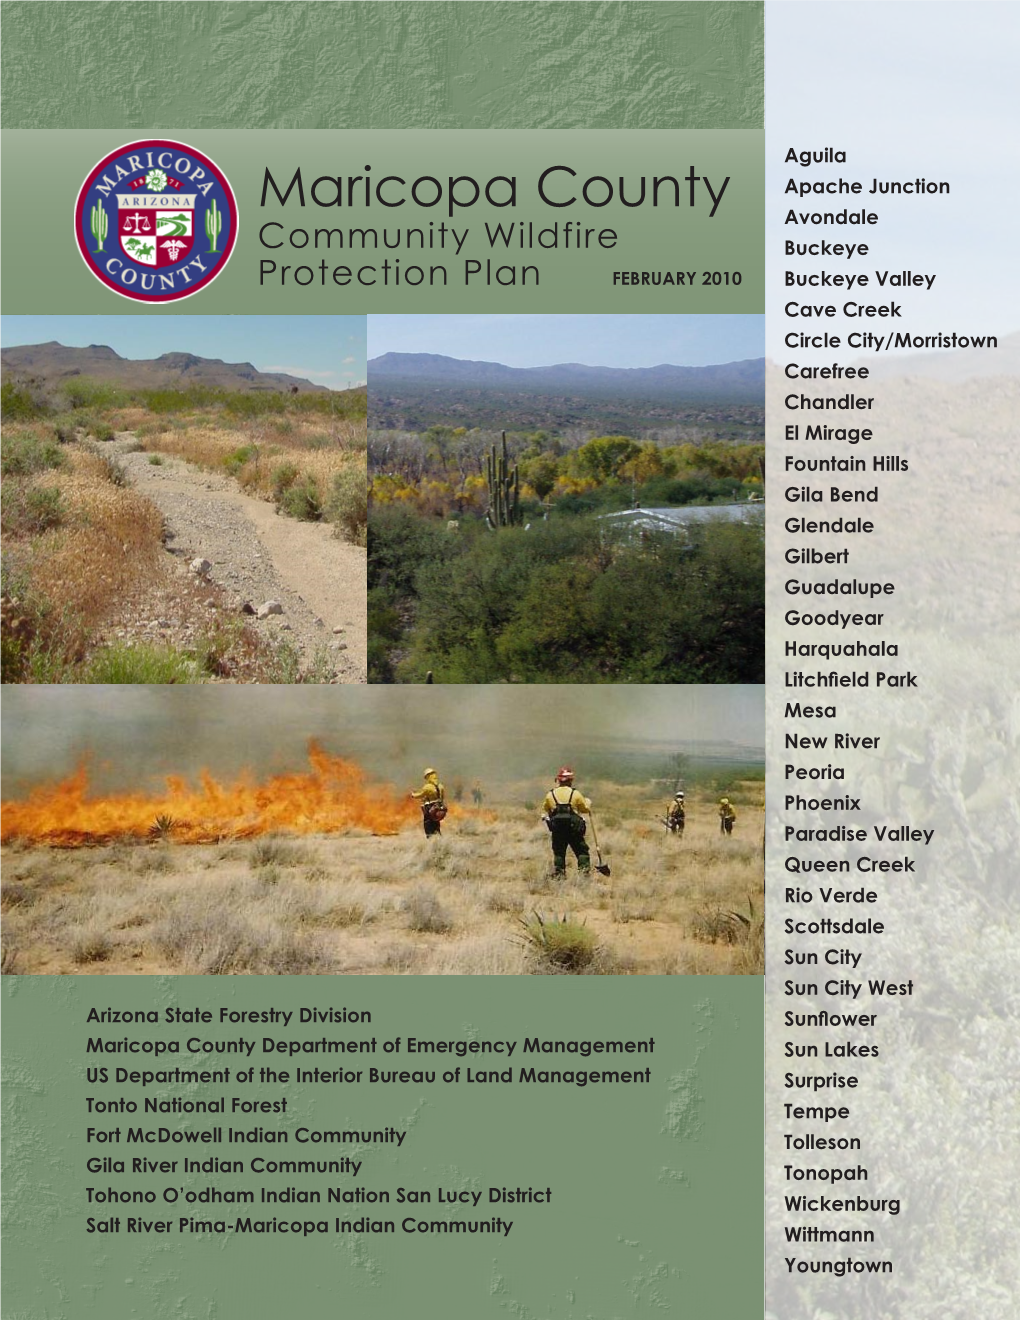 Maricopa County Community Wildfire Protection Plan